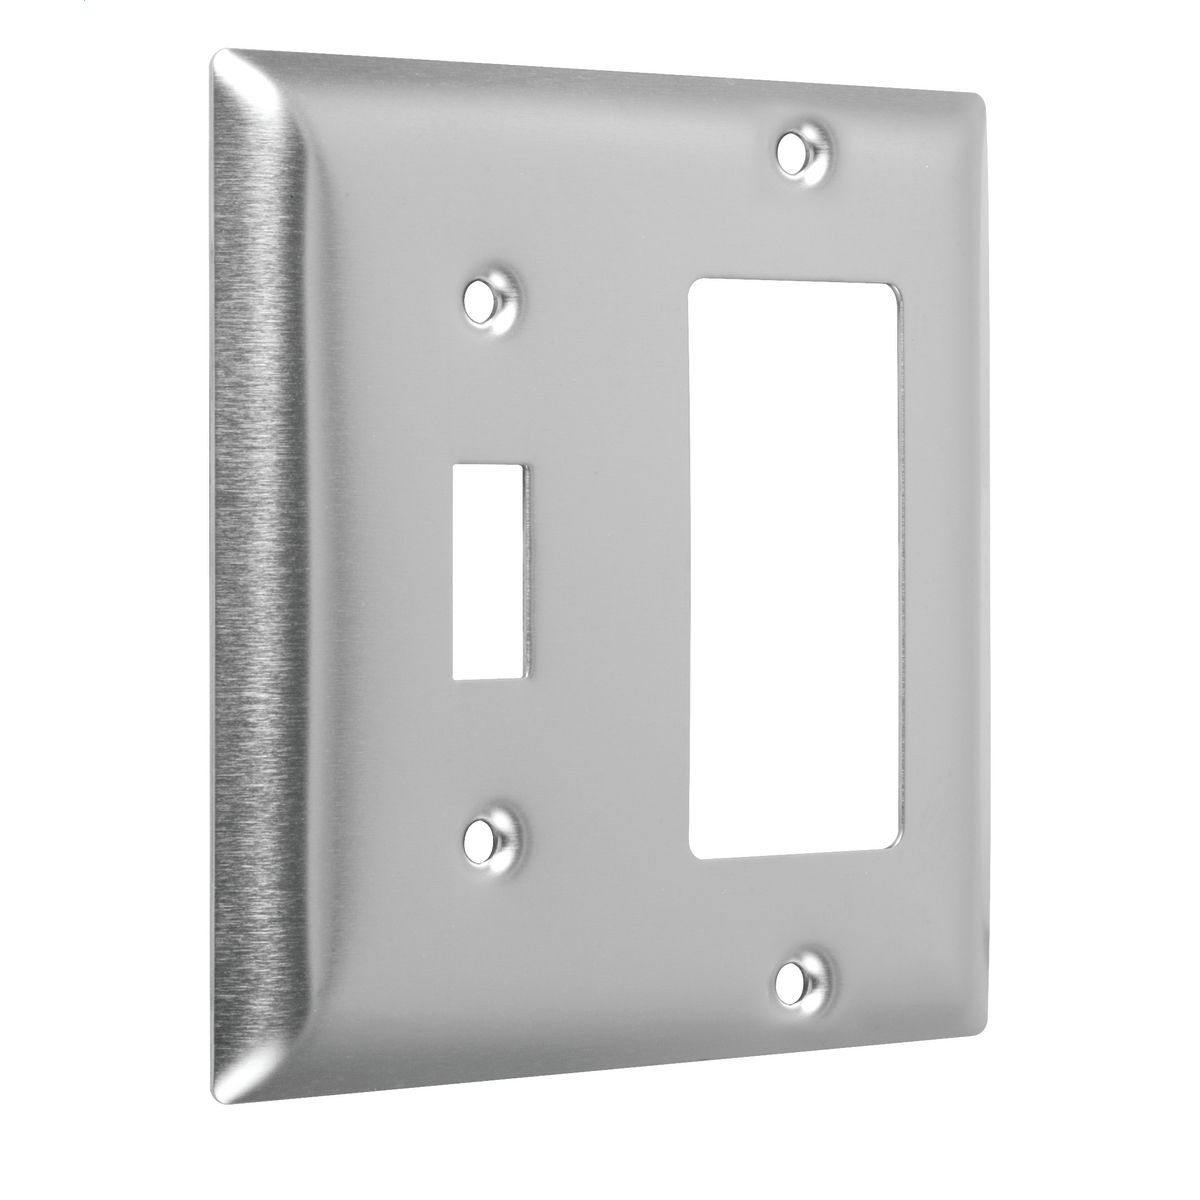 2G STANDARD TOGGLE/DECORA STAINLESS STL